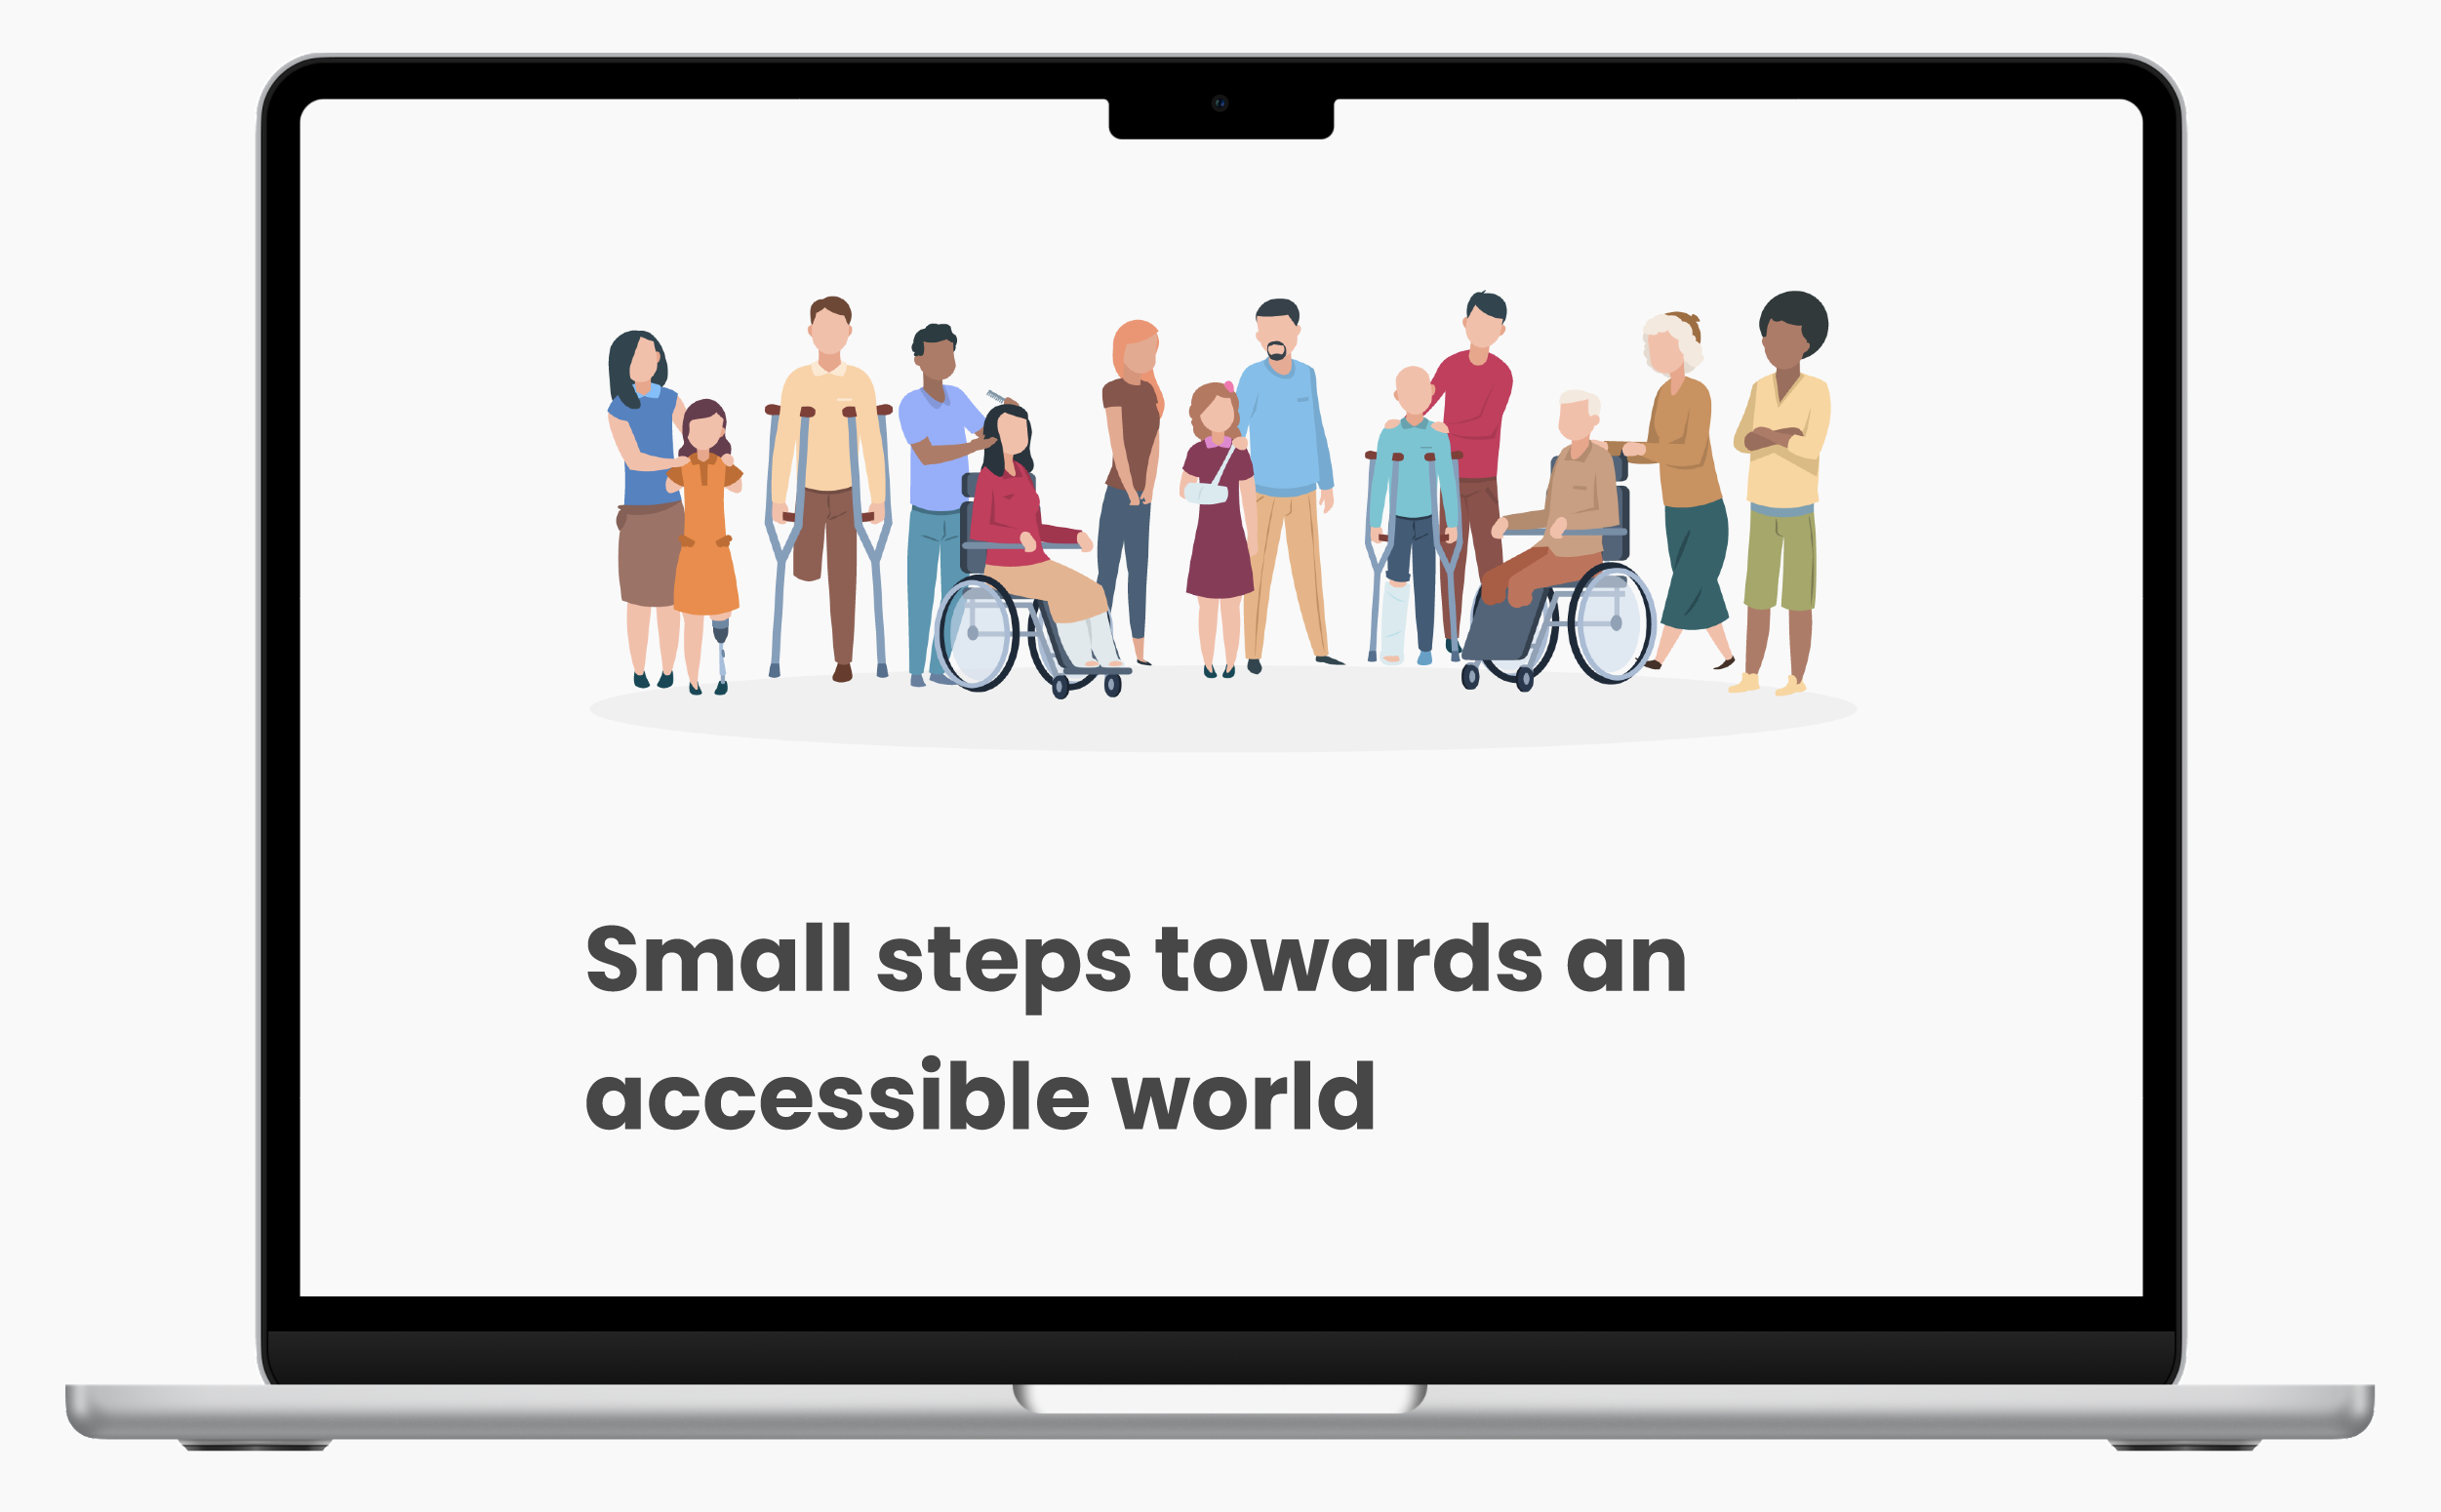 Laptop showing an inclusive image and the text 'Small steps towards an accessible world'.